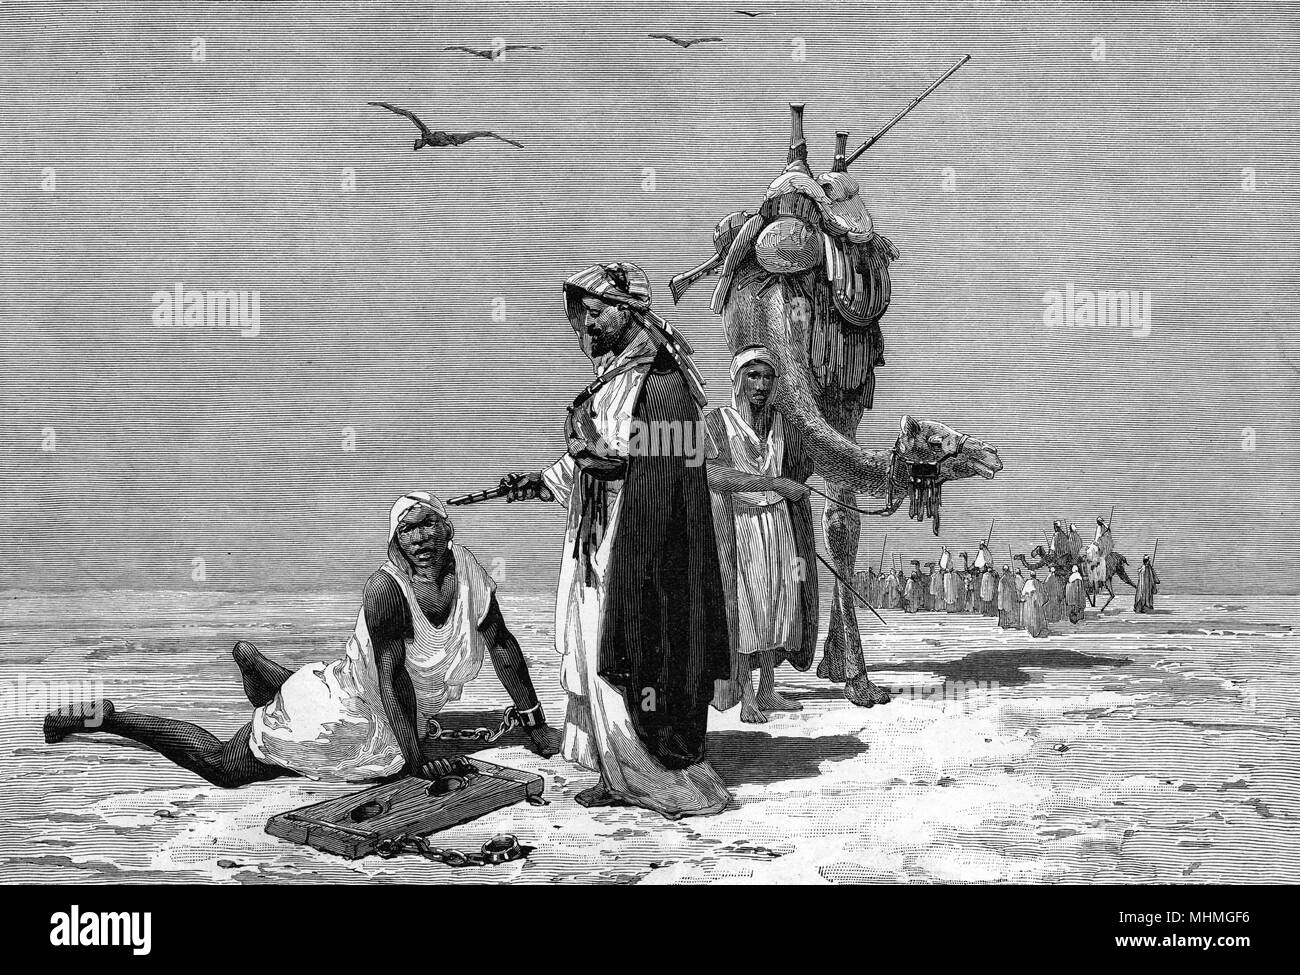 EAST AFRICA A trader gives the coup de grace to an exhausted slave       Date: 1884 Stock Photo